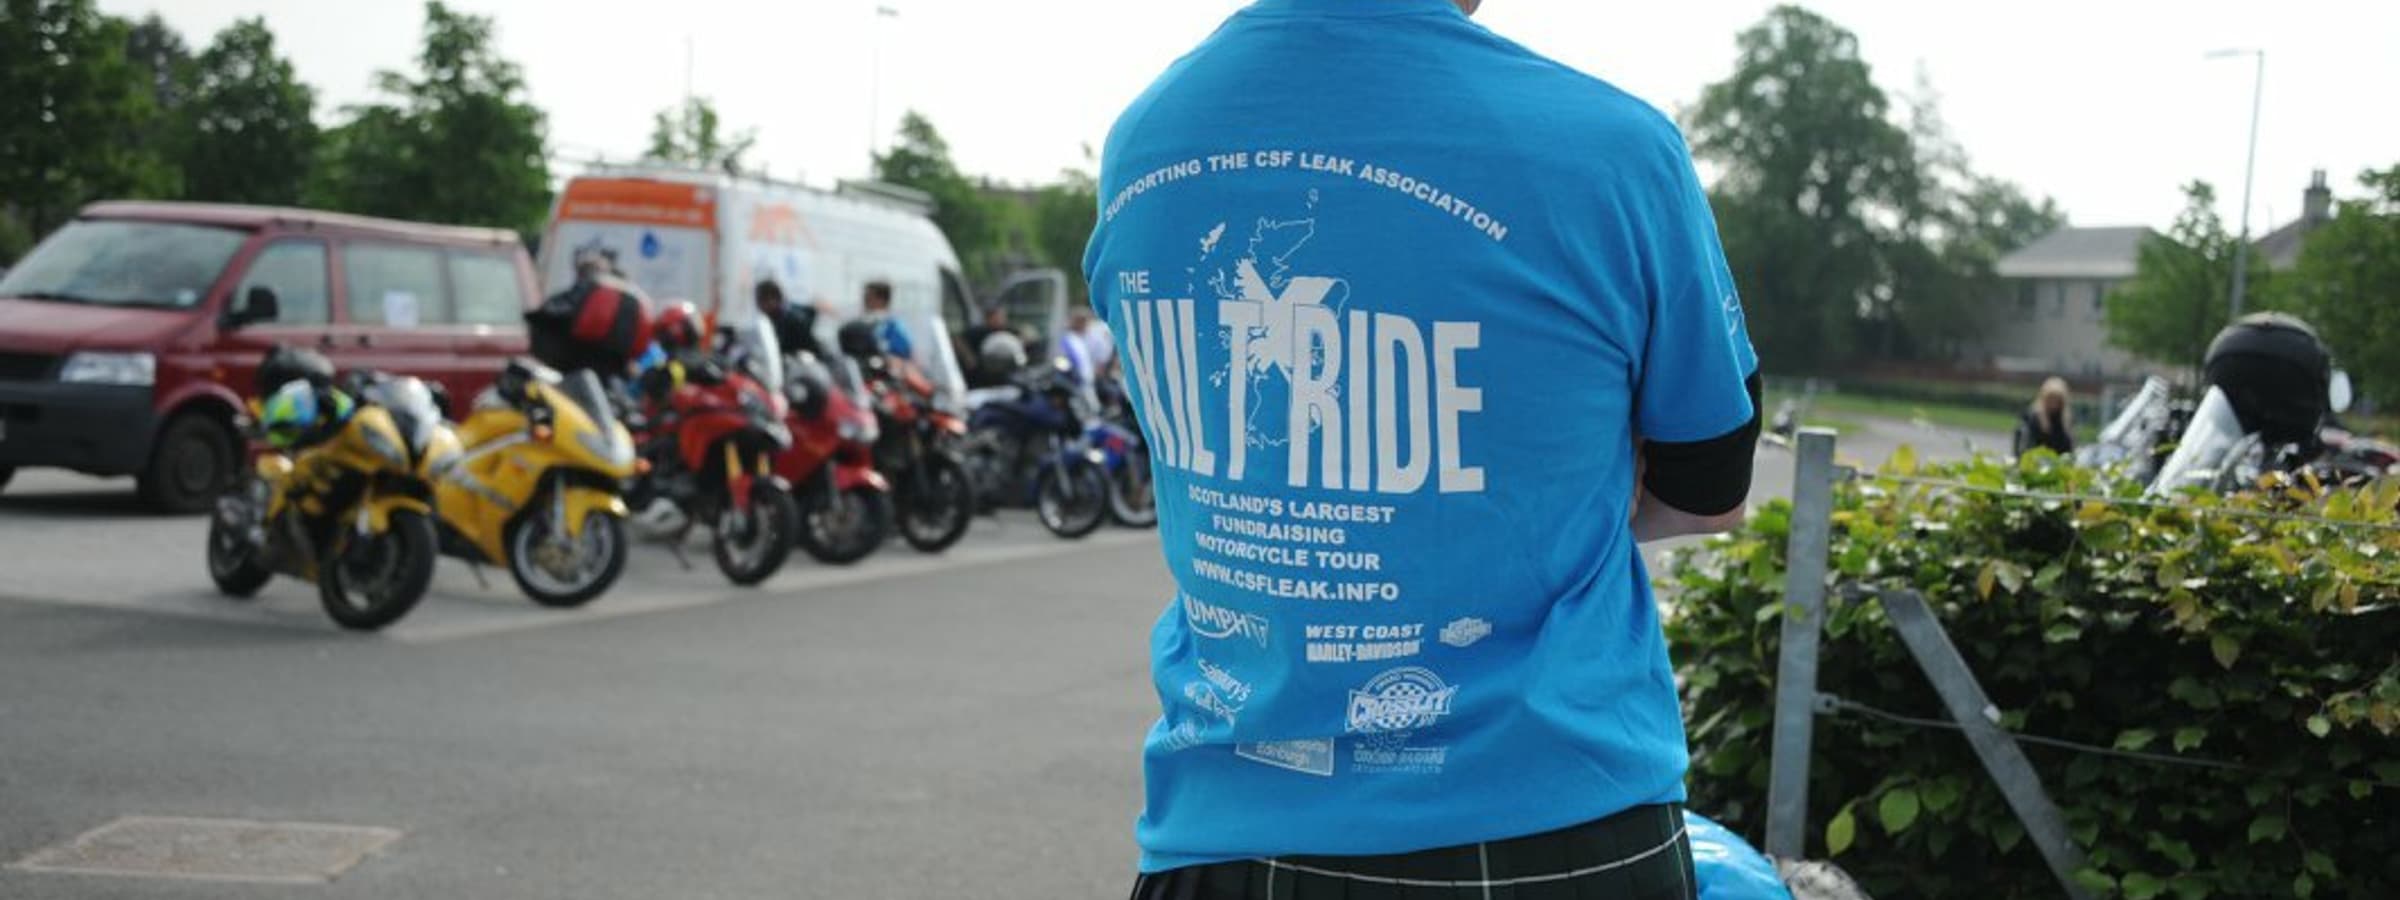 A man from behind wearing a kilt and a shirt that says "Kilt Ride".